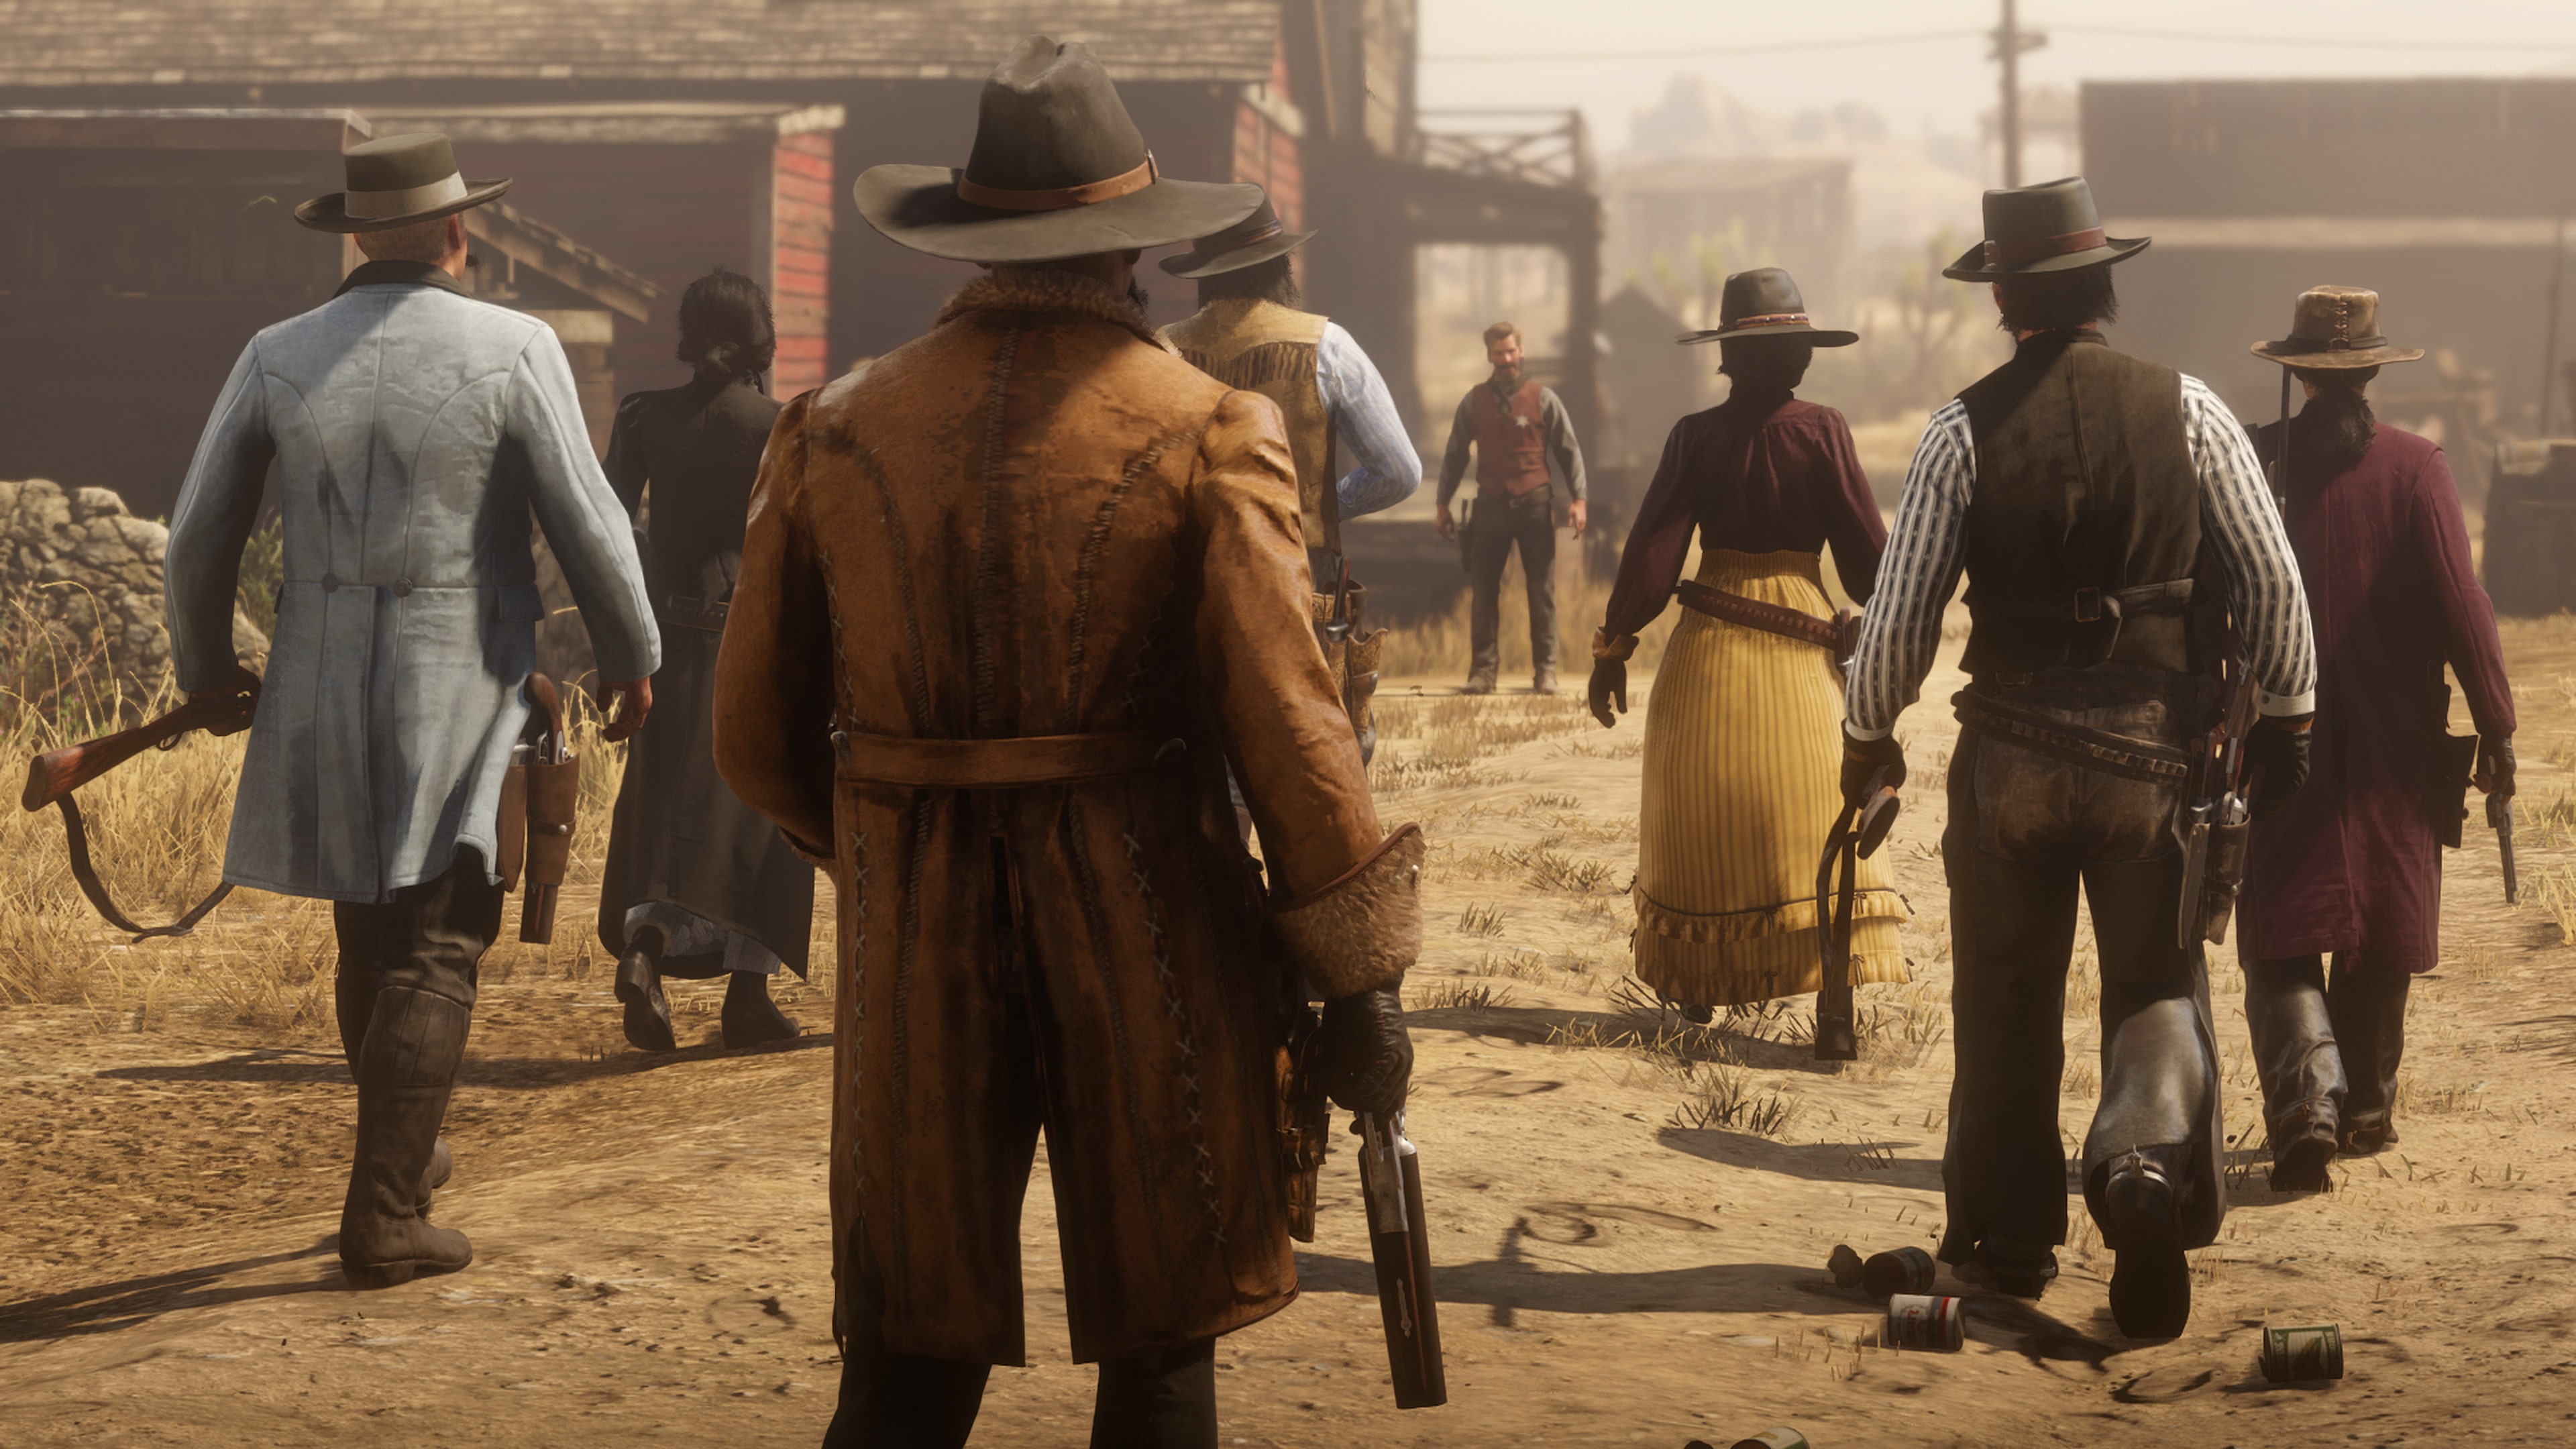 playstation store ps4 red dead redemption 2